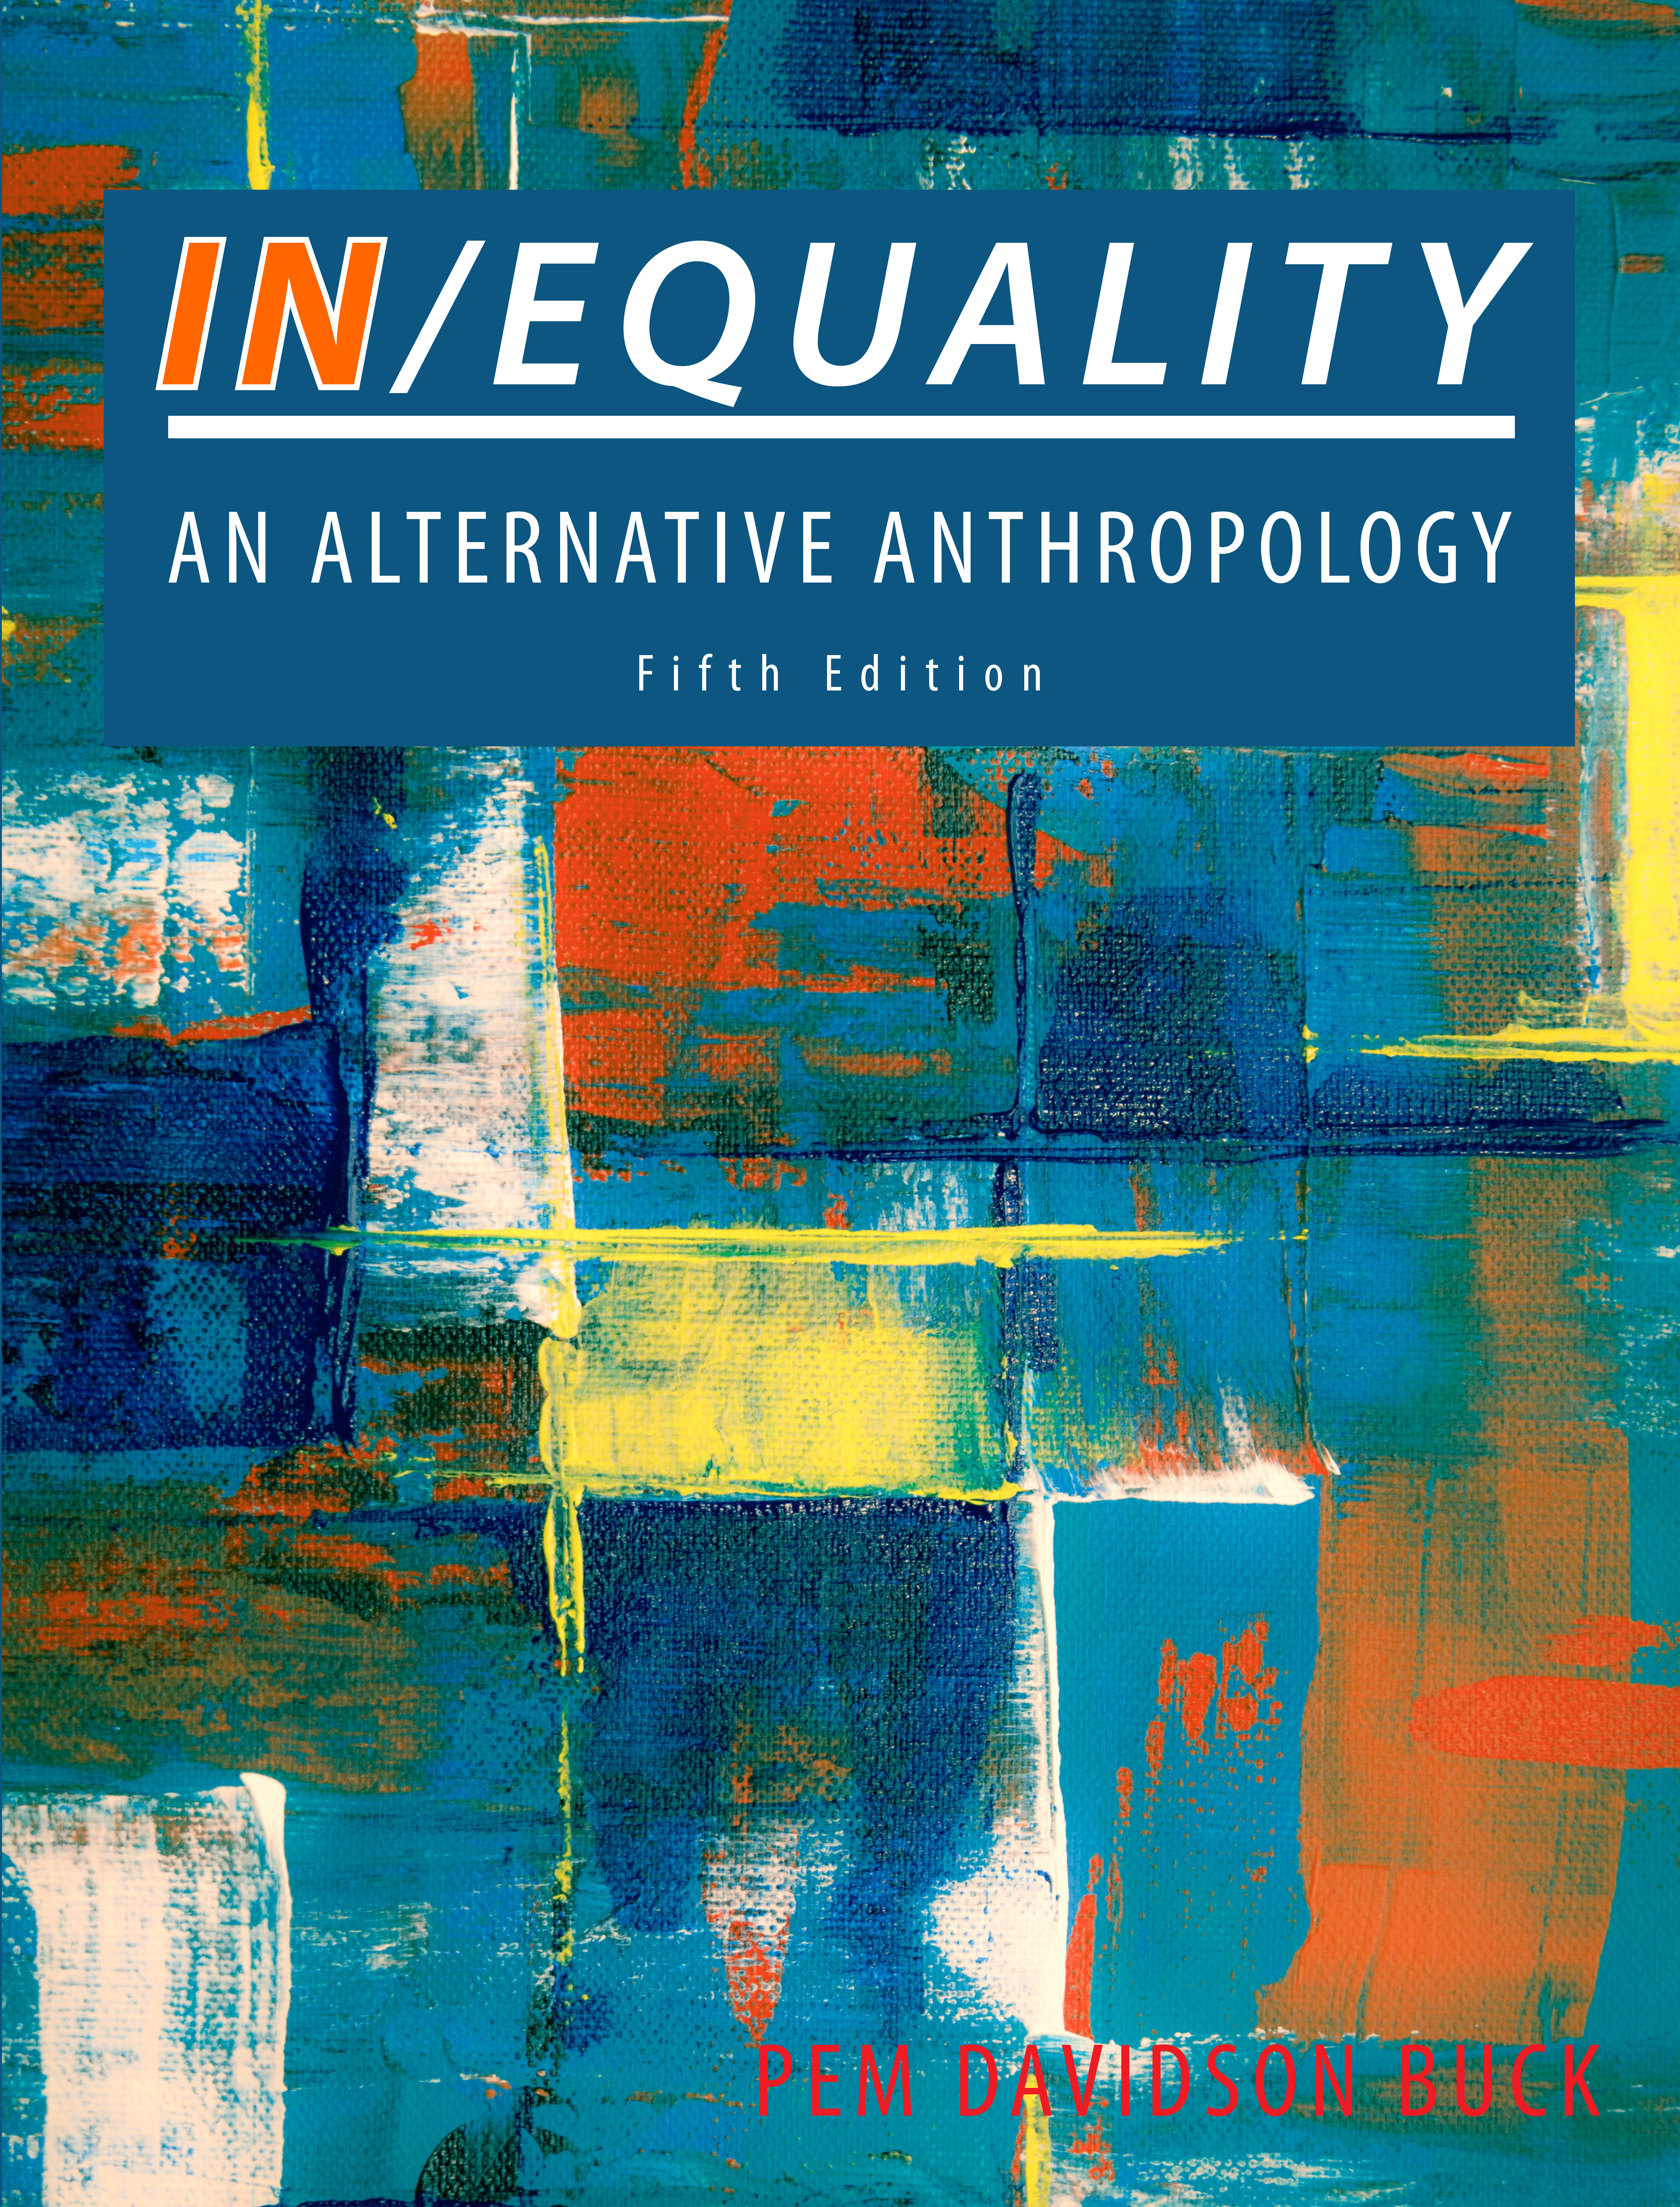 Anthropology Text Cover